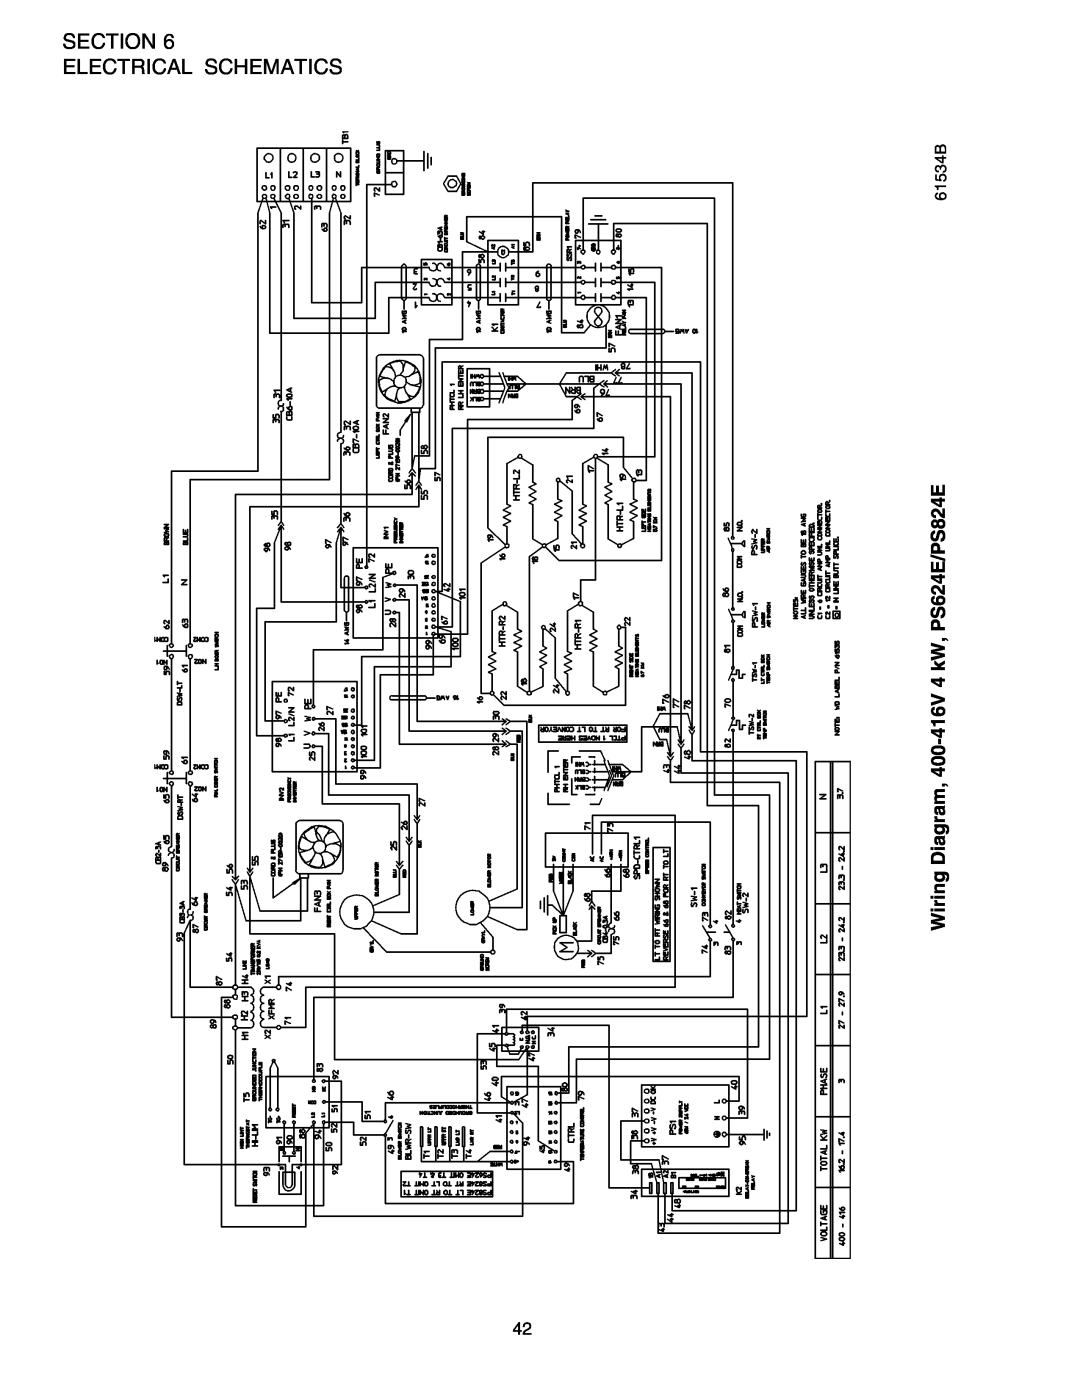 Middleby Marshall Section Electrical Schematics, Wiring Diagram, 400-416V 4 kW, PS624E/PS824E, 61534B 